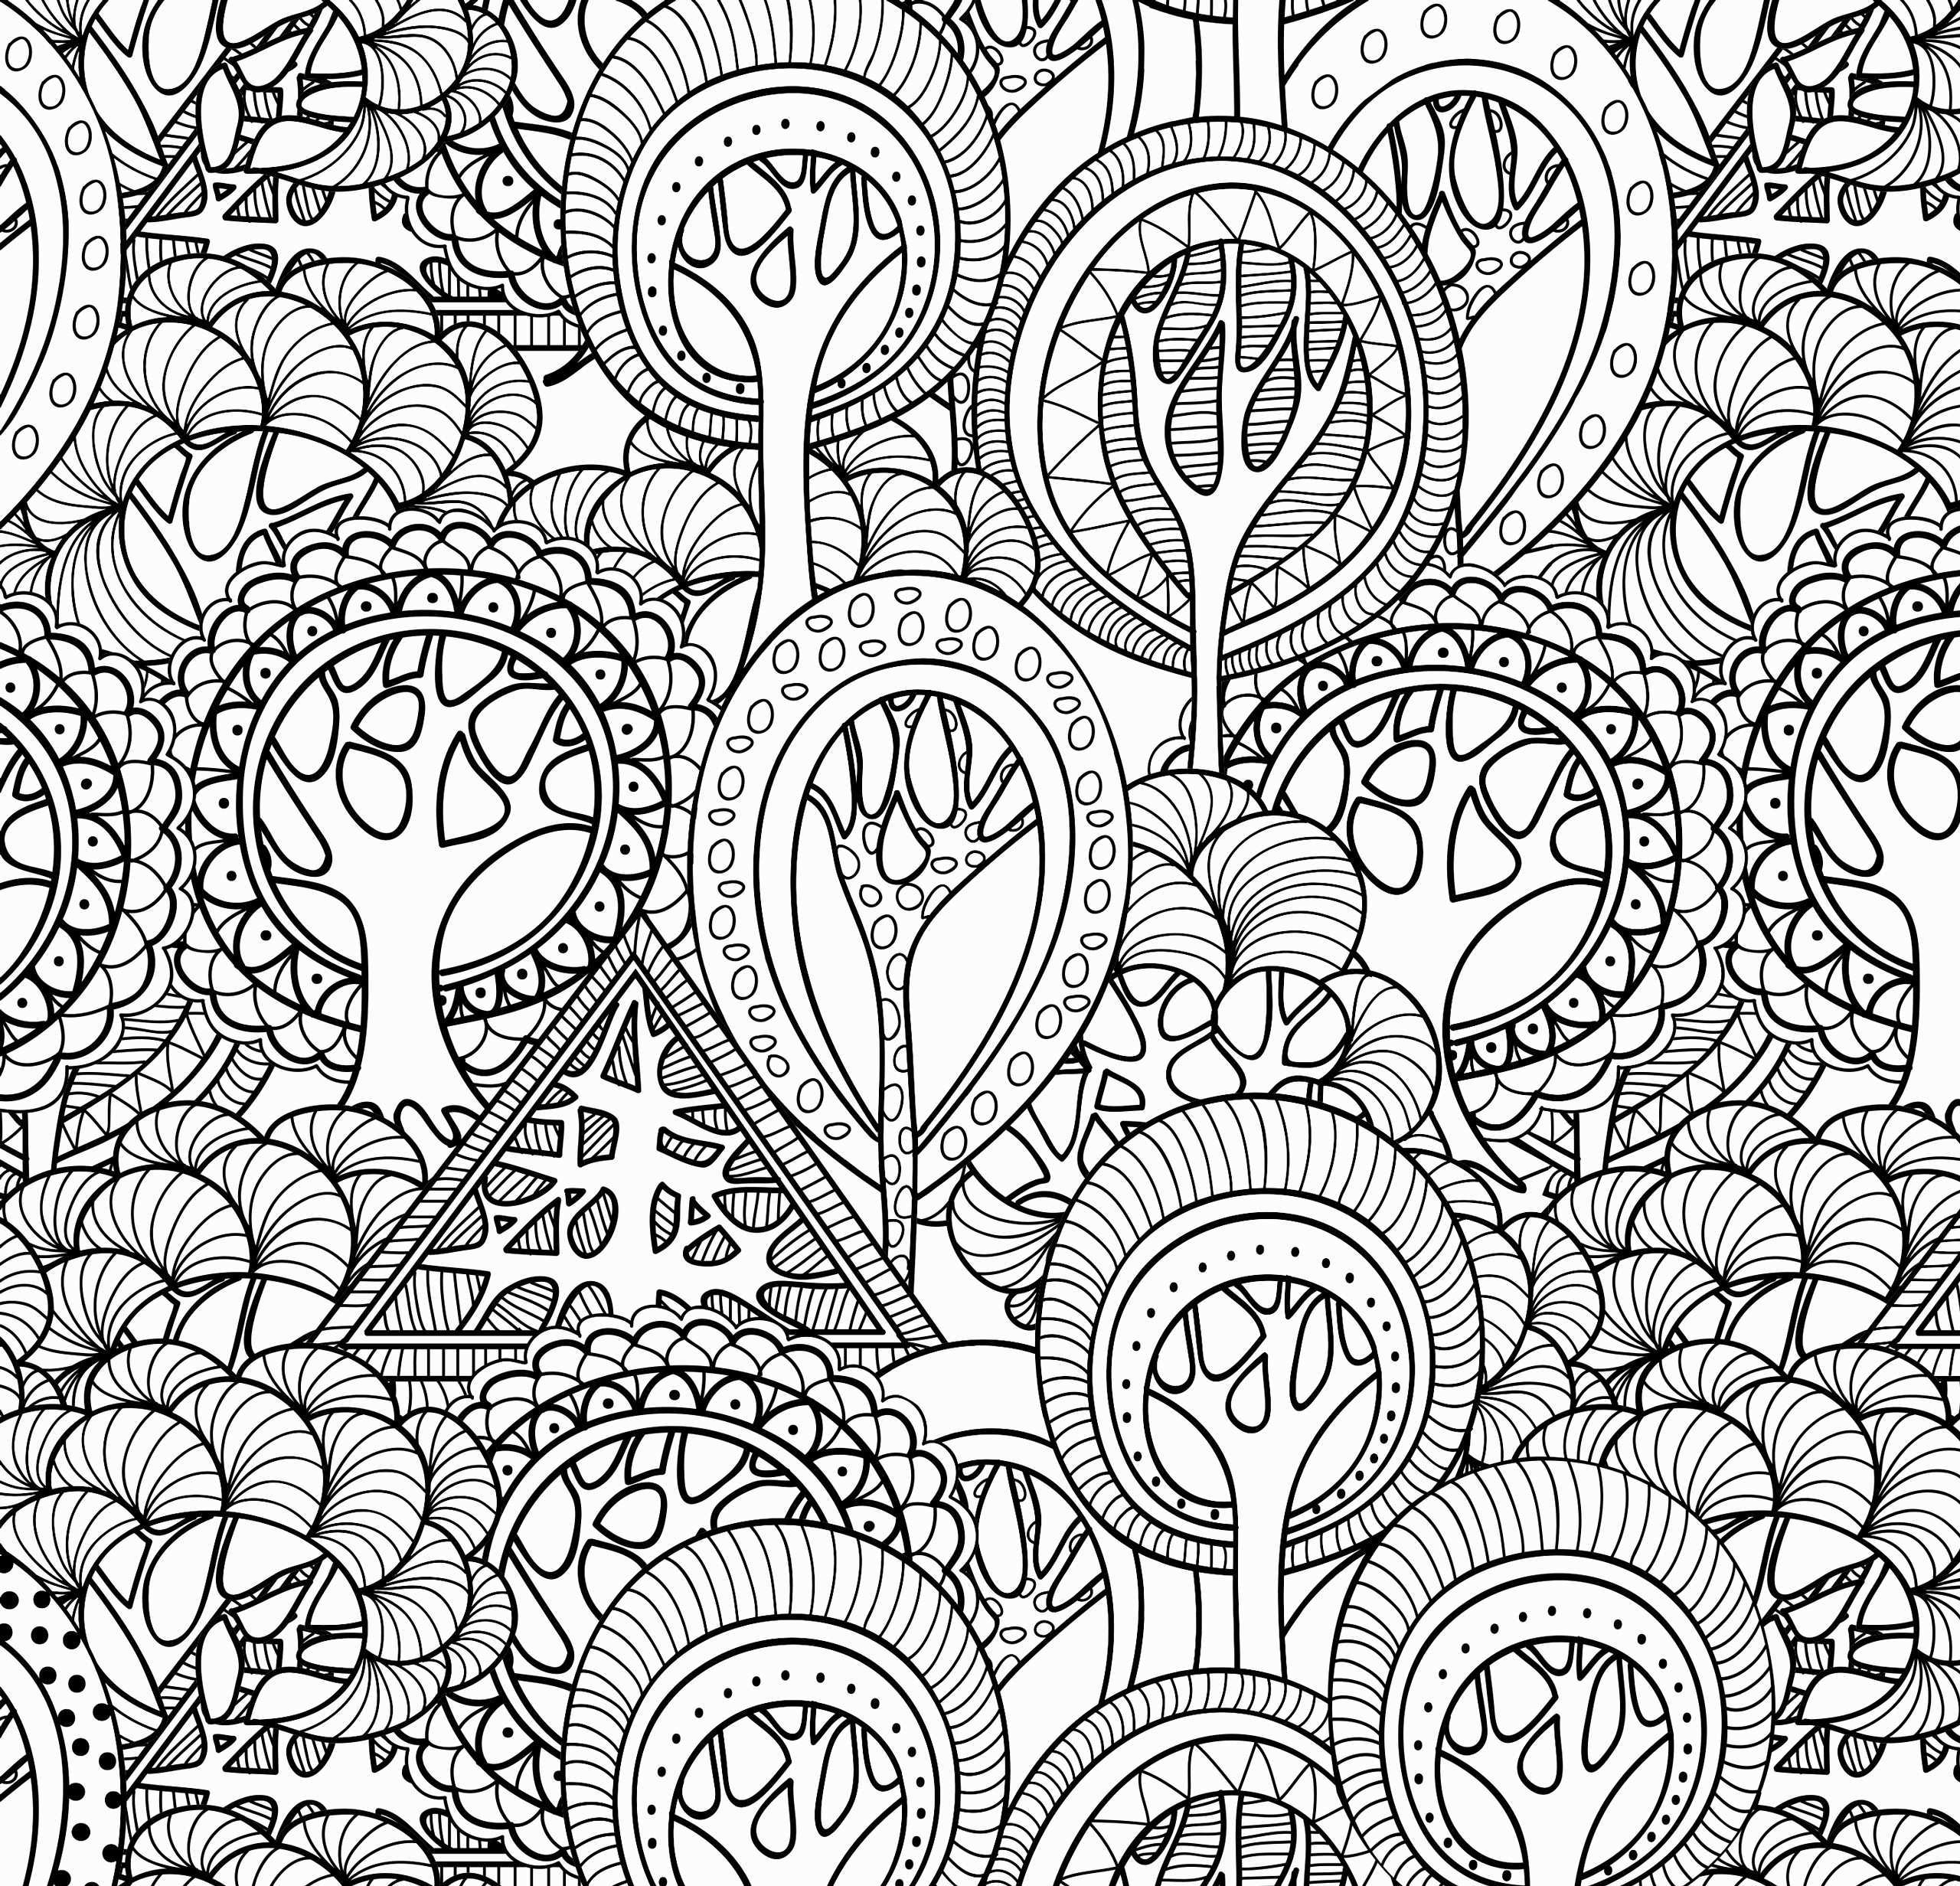 Madeline Coloring Pages Printable Menorah Coloring Page New Madeline Cooper Caperneam On Pinterest